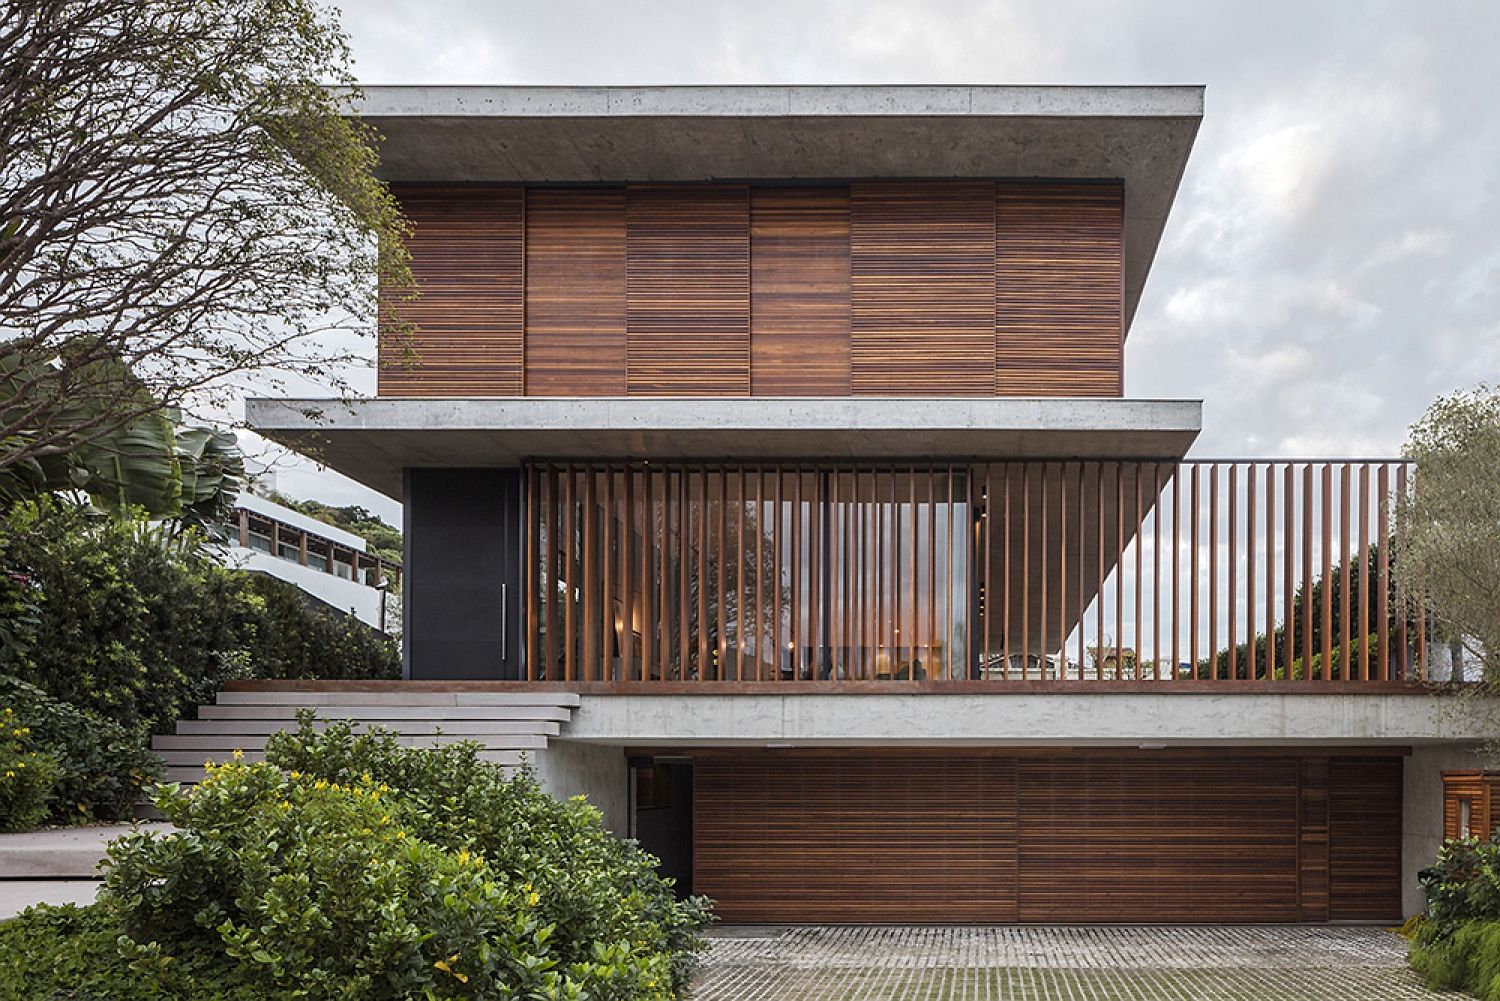 Bravos House: Encased in Moving Wooden Panels and Slats